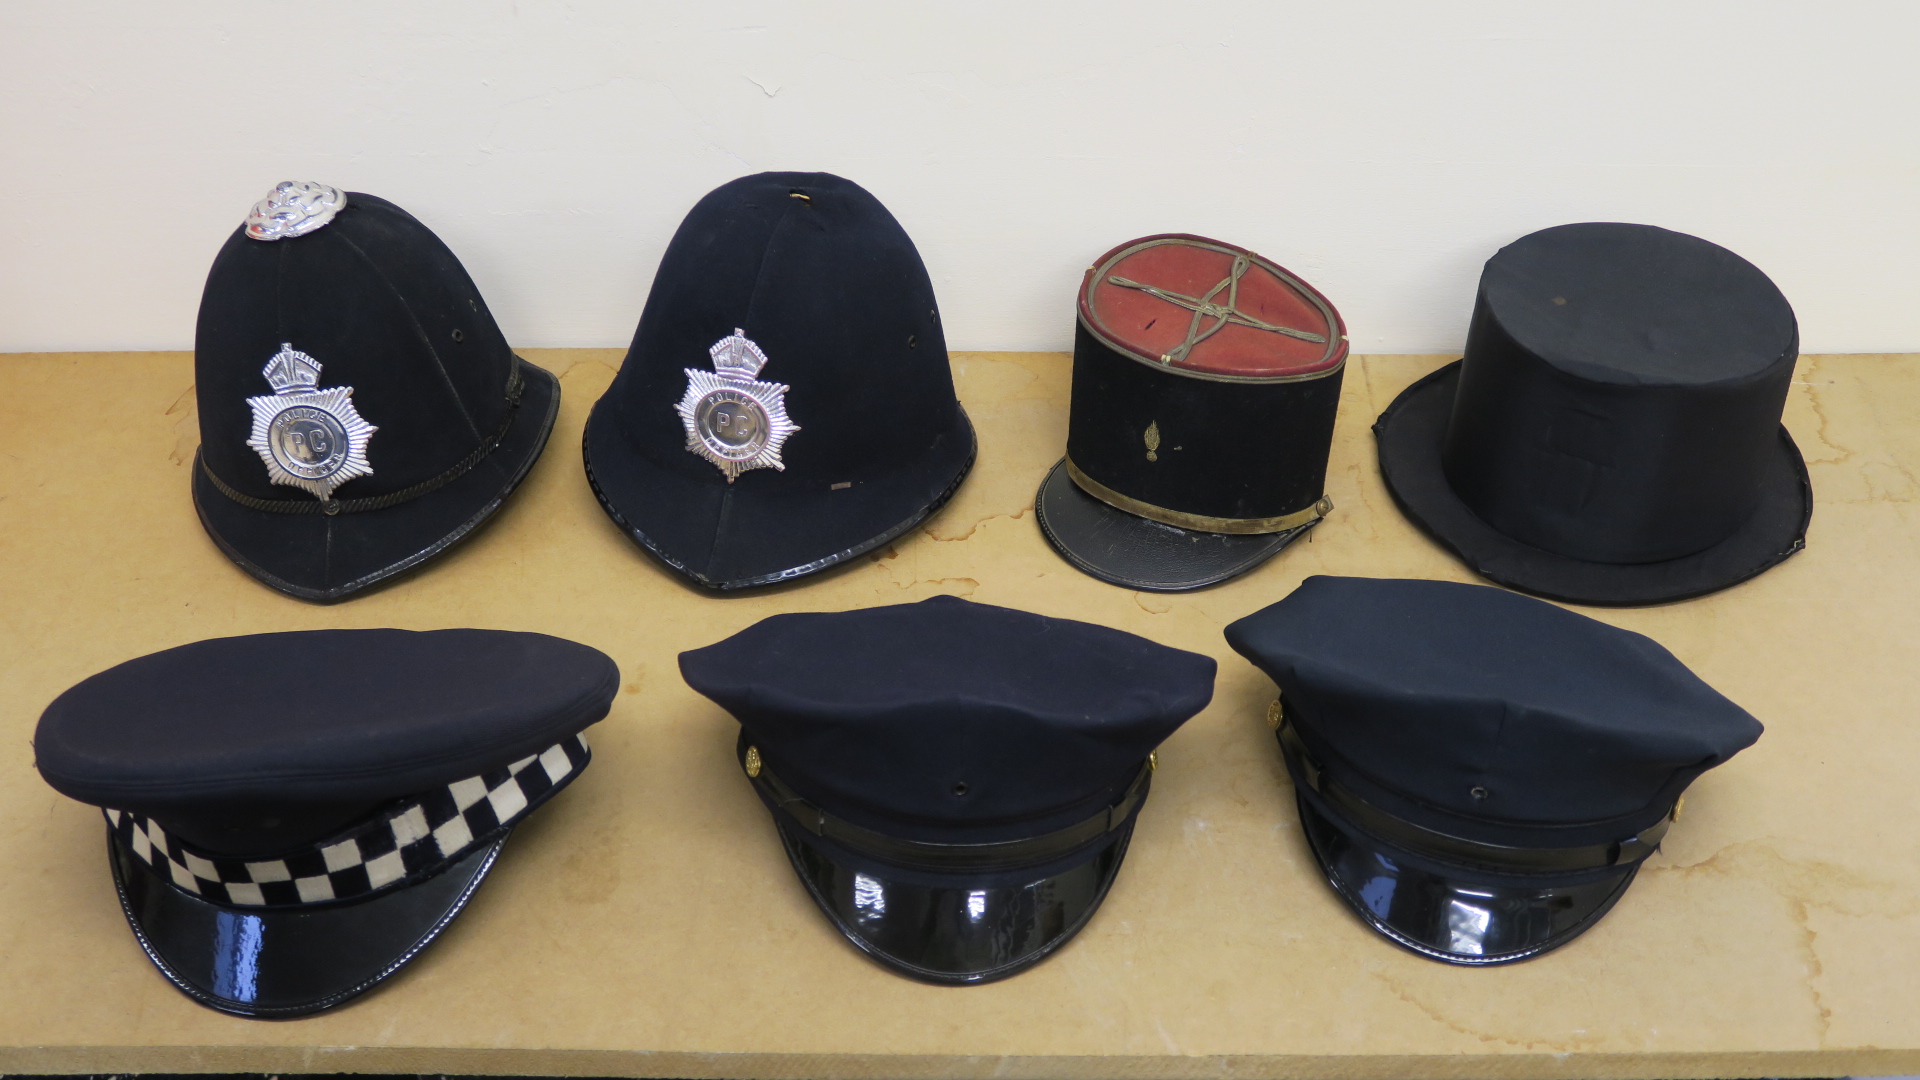 Police helmets - two of American style with peak caps (size 7 3/8"),